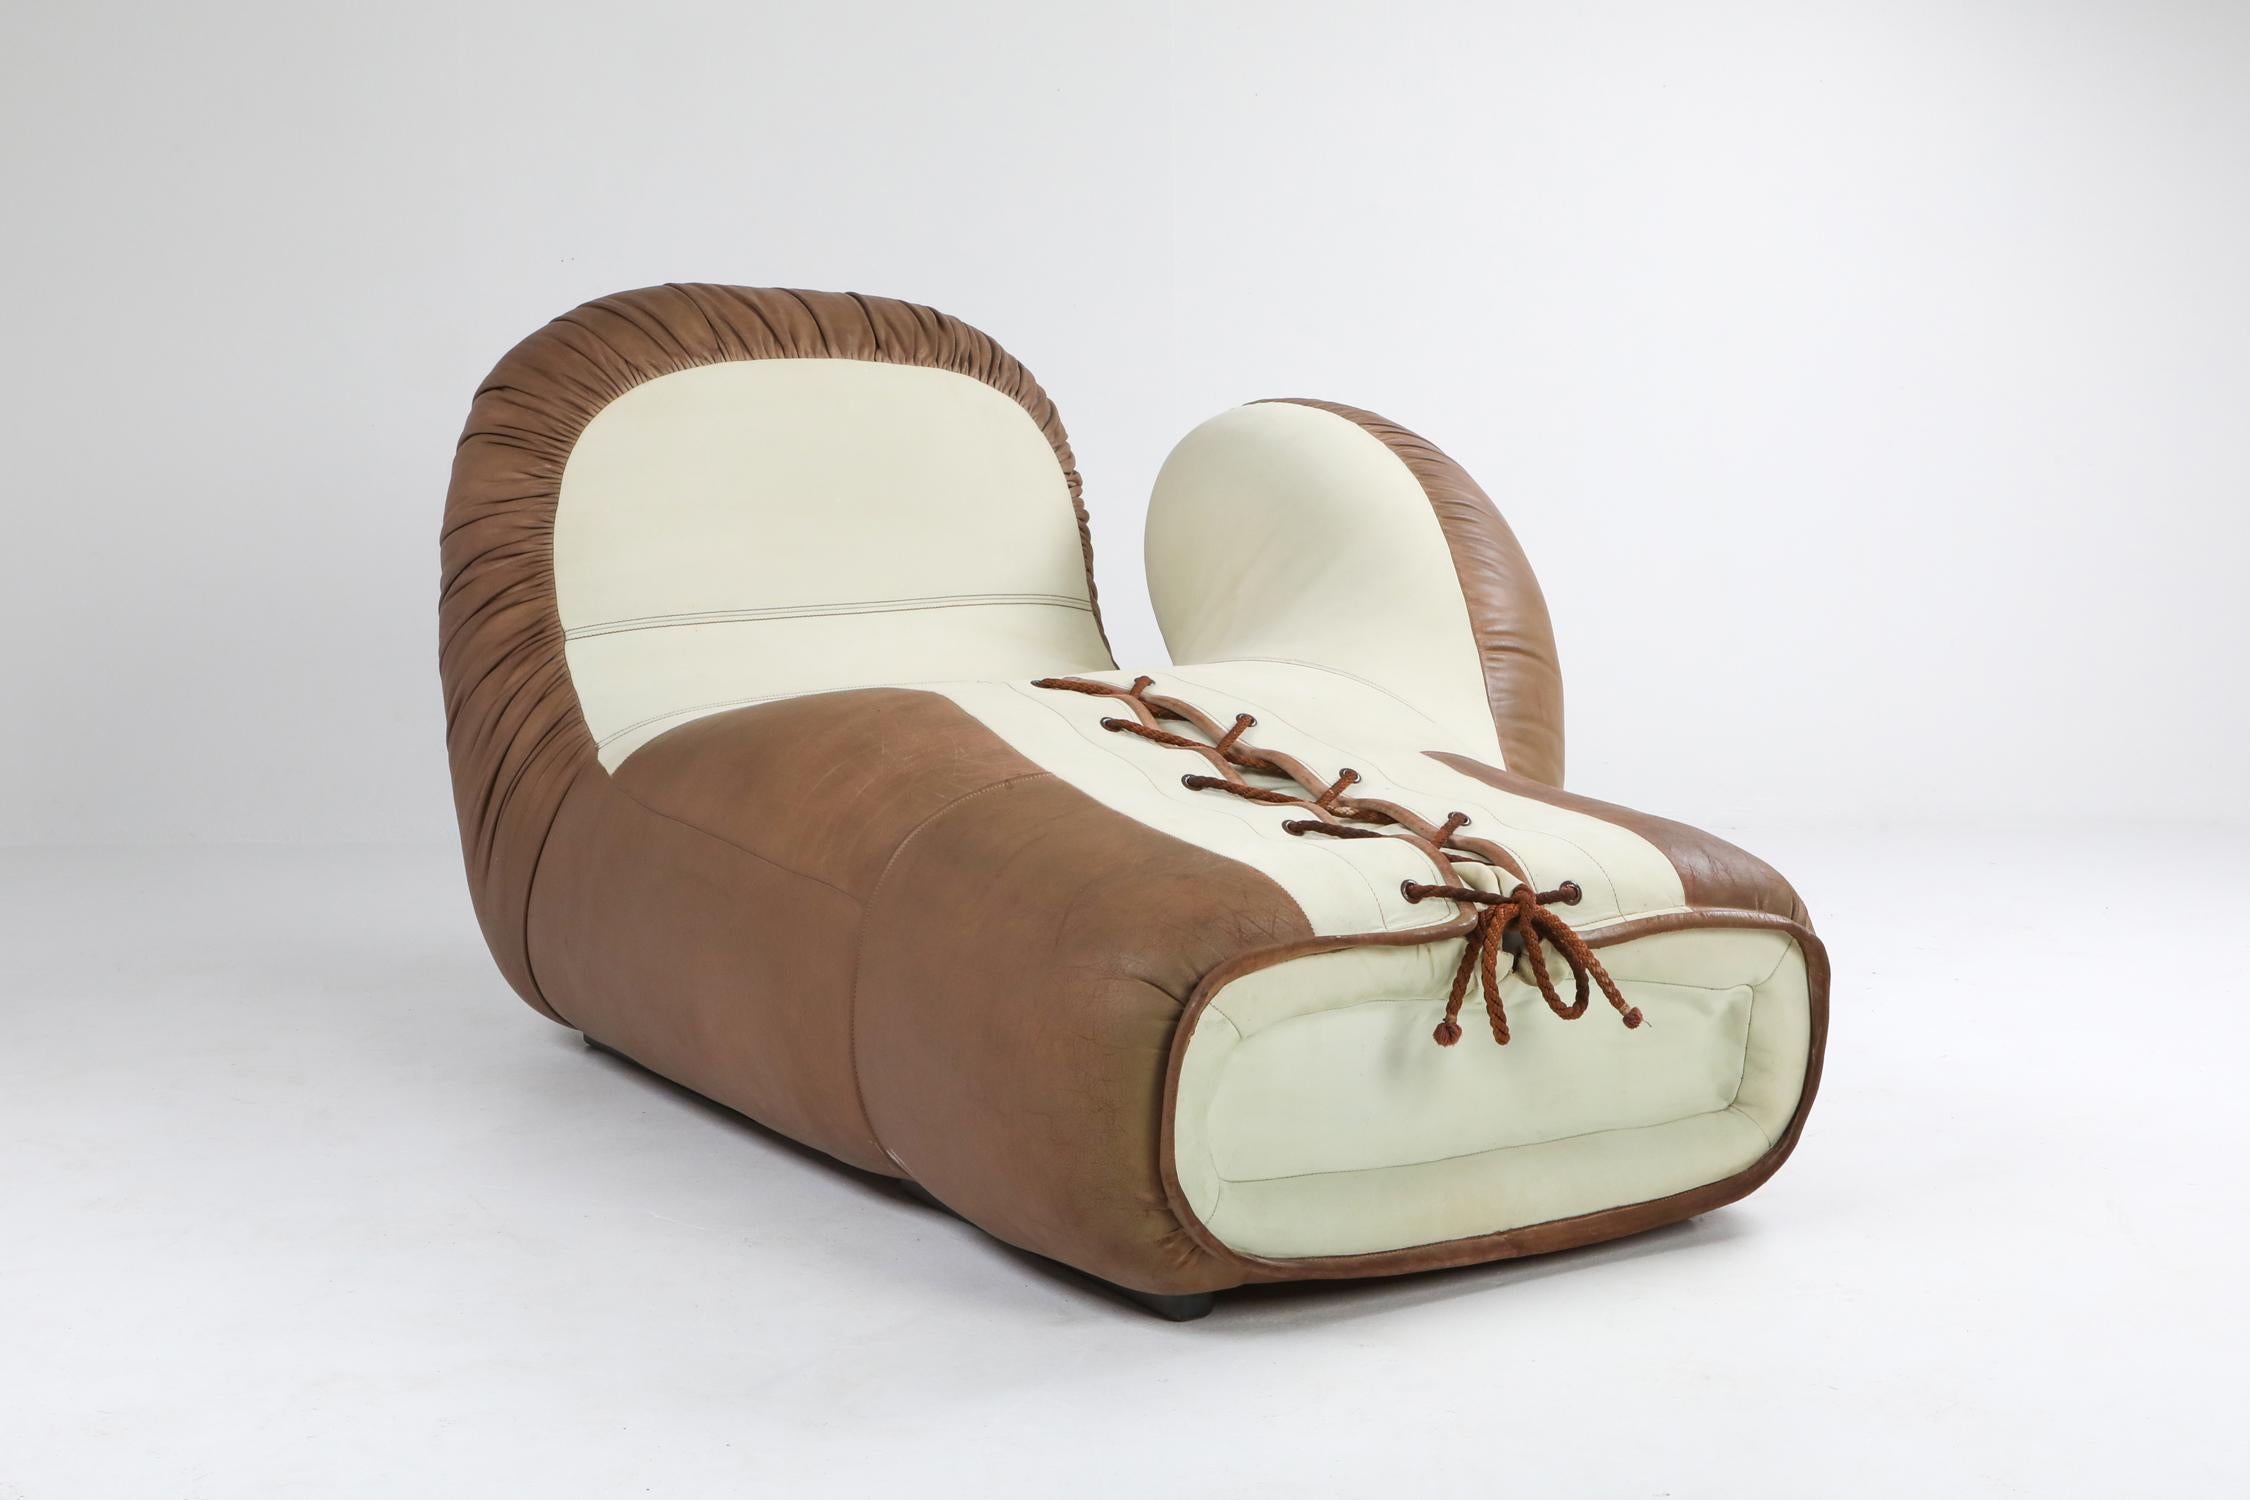 Boxing Glove Sectional Sofa, DS-2878 by De Sede, Switzerland 2